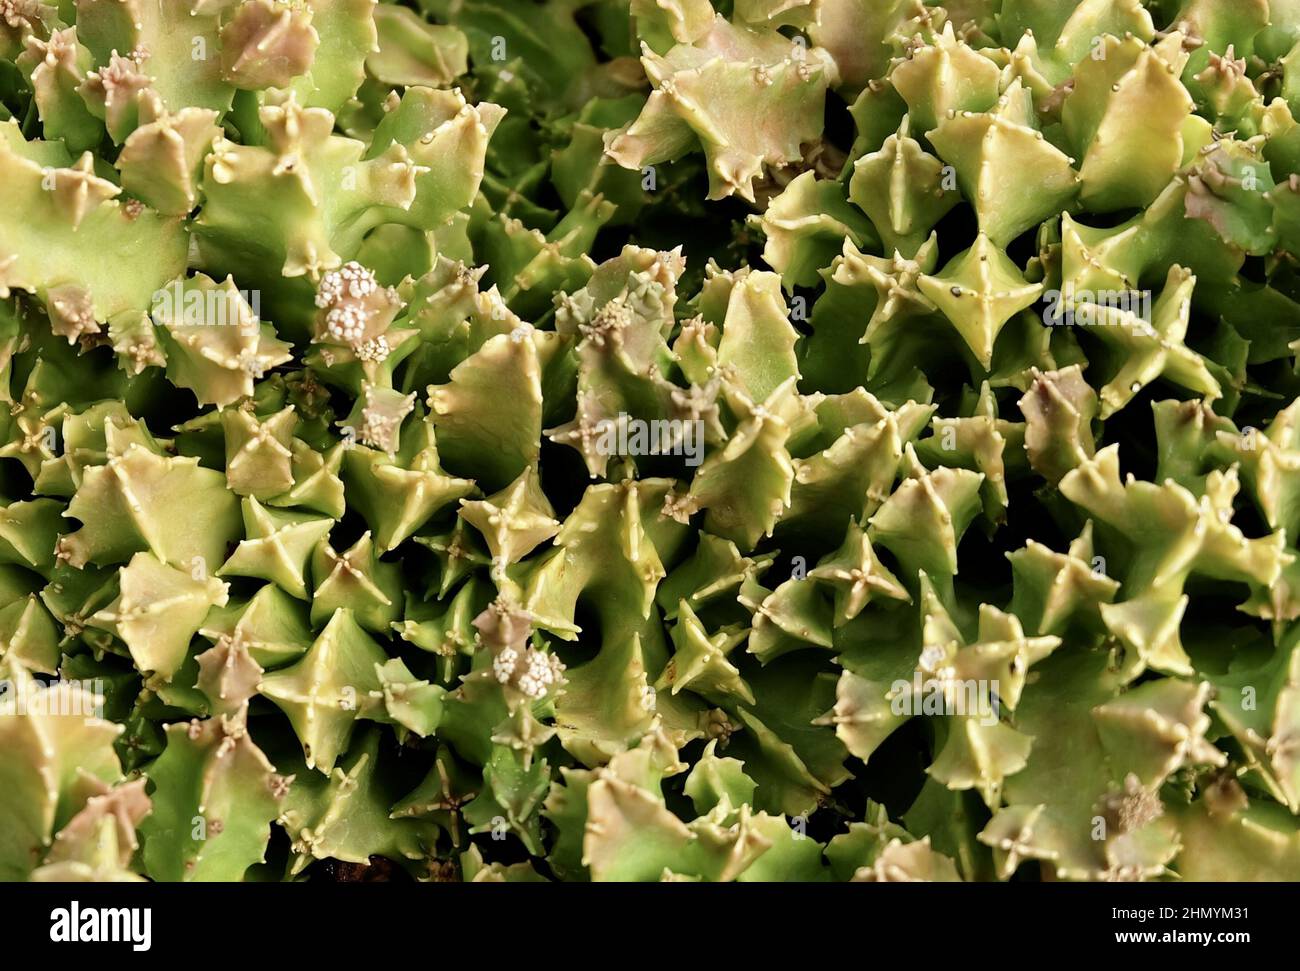 Top View of Green Huernia Plants, A Succulent Plants with Sharp Thorns for Garden Decoration. Stock Photo